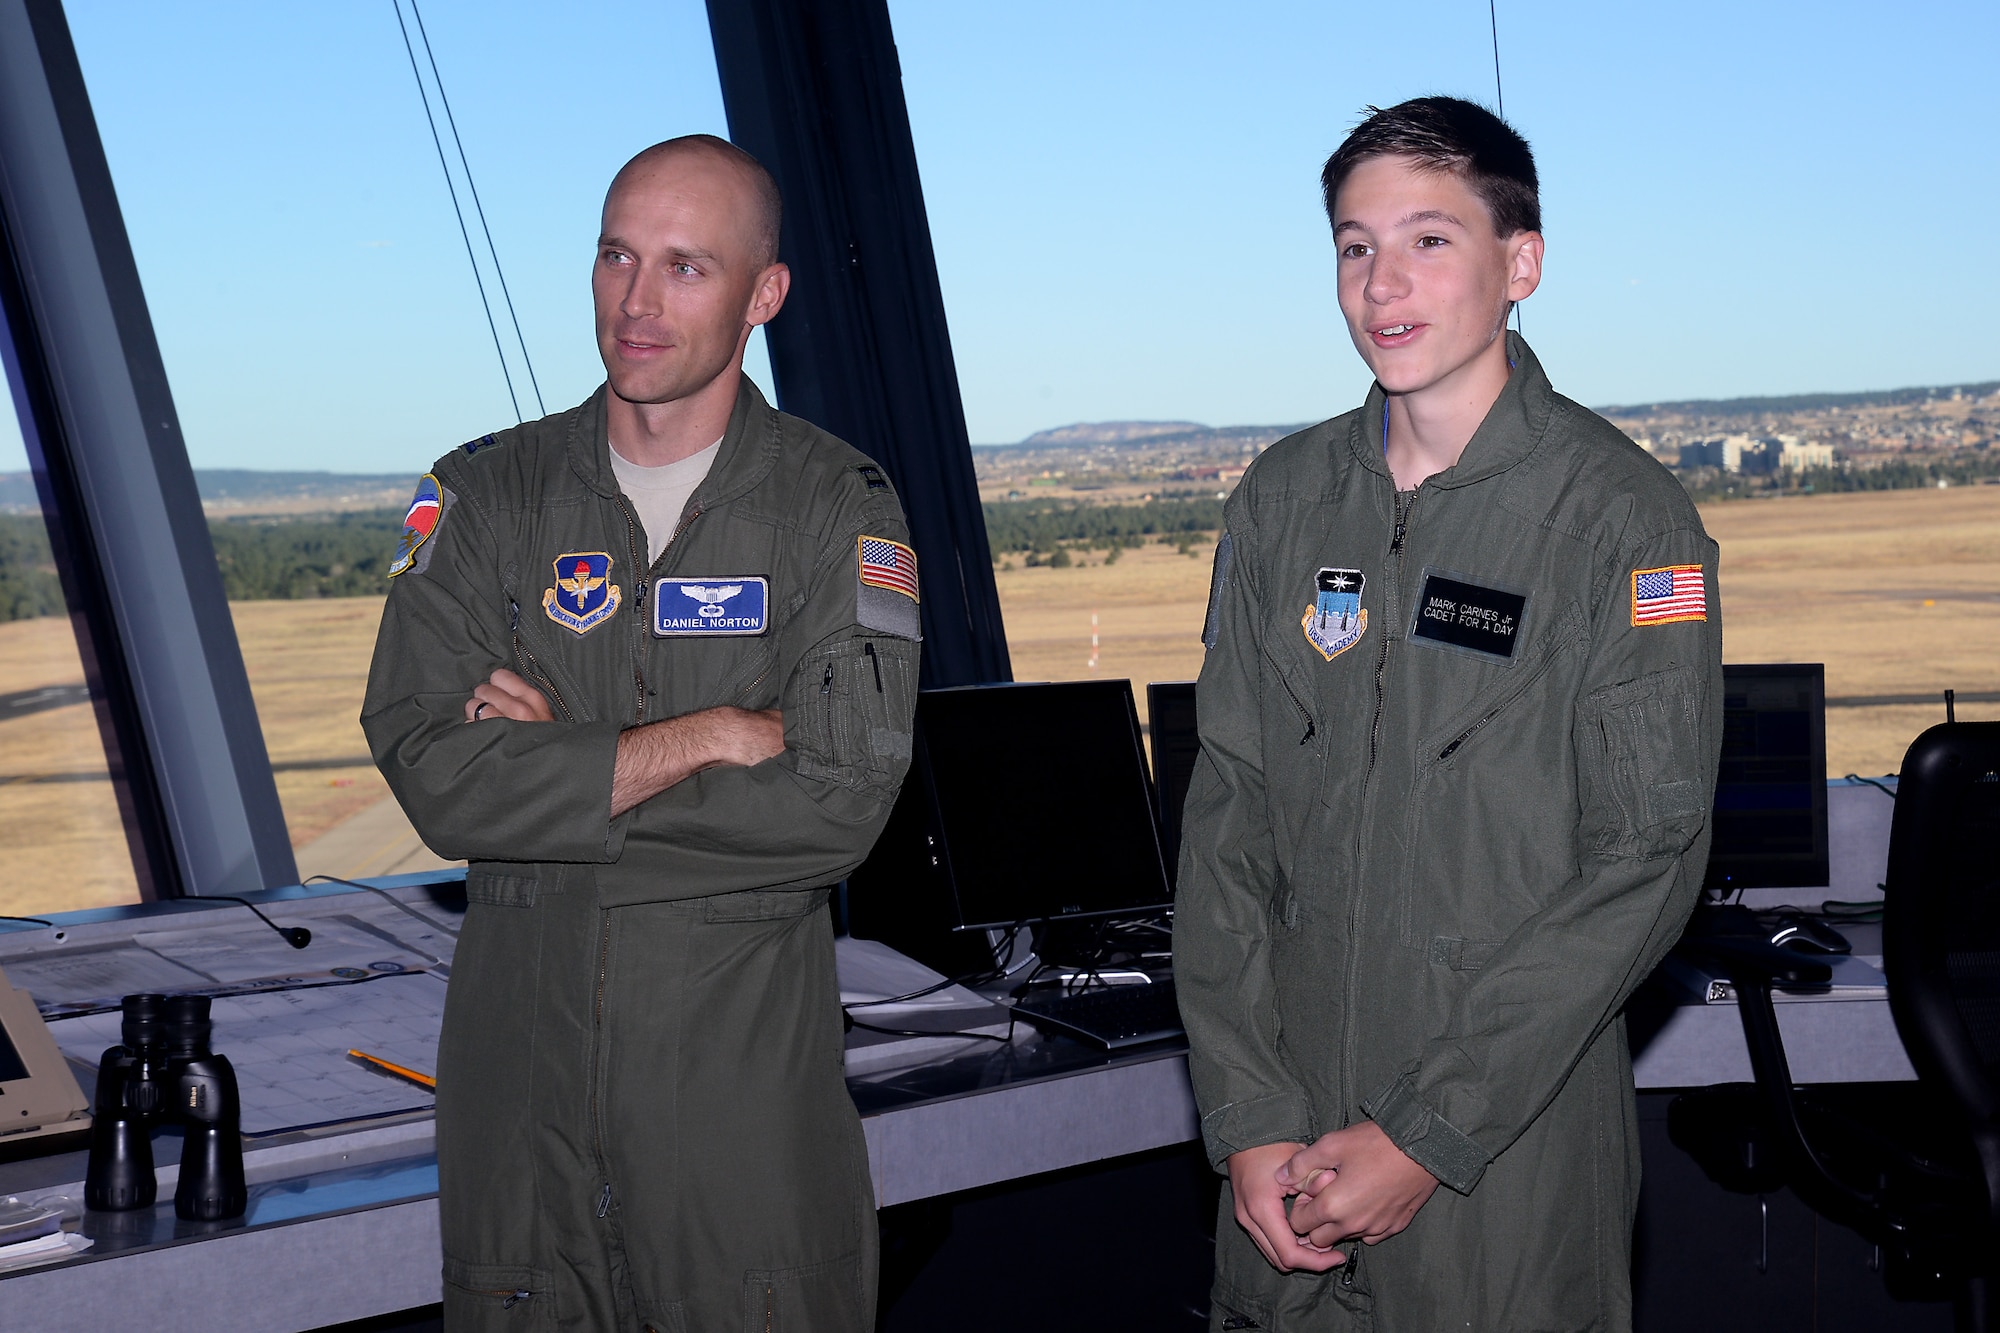 Mark Carnes, the U.S. Air Force Academy's latest Cadet for a Day, and Capt. Daniel Norton, look out the control tower windows at the Academy airfield, Nov. 10, 2016. The Academy has teamed up with the Make a Wish Foundation to help children with serious medical conditions achieve their dreams of becoming an Academy cadet, through the Cadet for a Day Program. Norton is the flight commander for the Cadet Instructor Pilot Upgrade Program for the 94th Flying Training Squadron. (U.S. Air Force photo/Darcie Ibidapo)